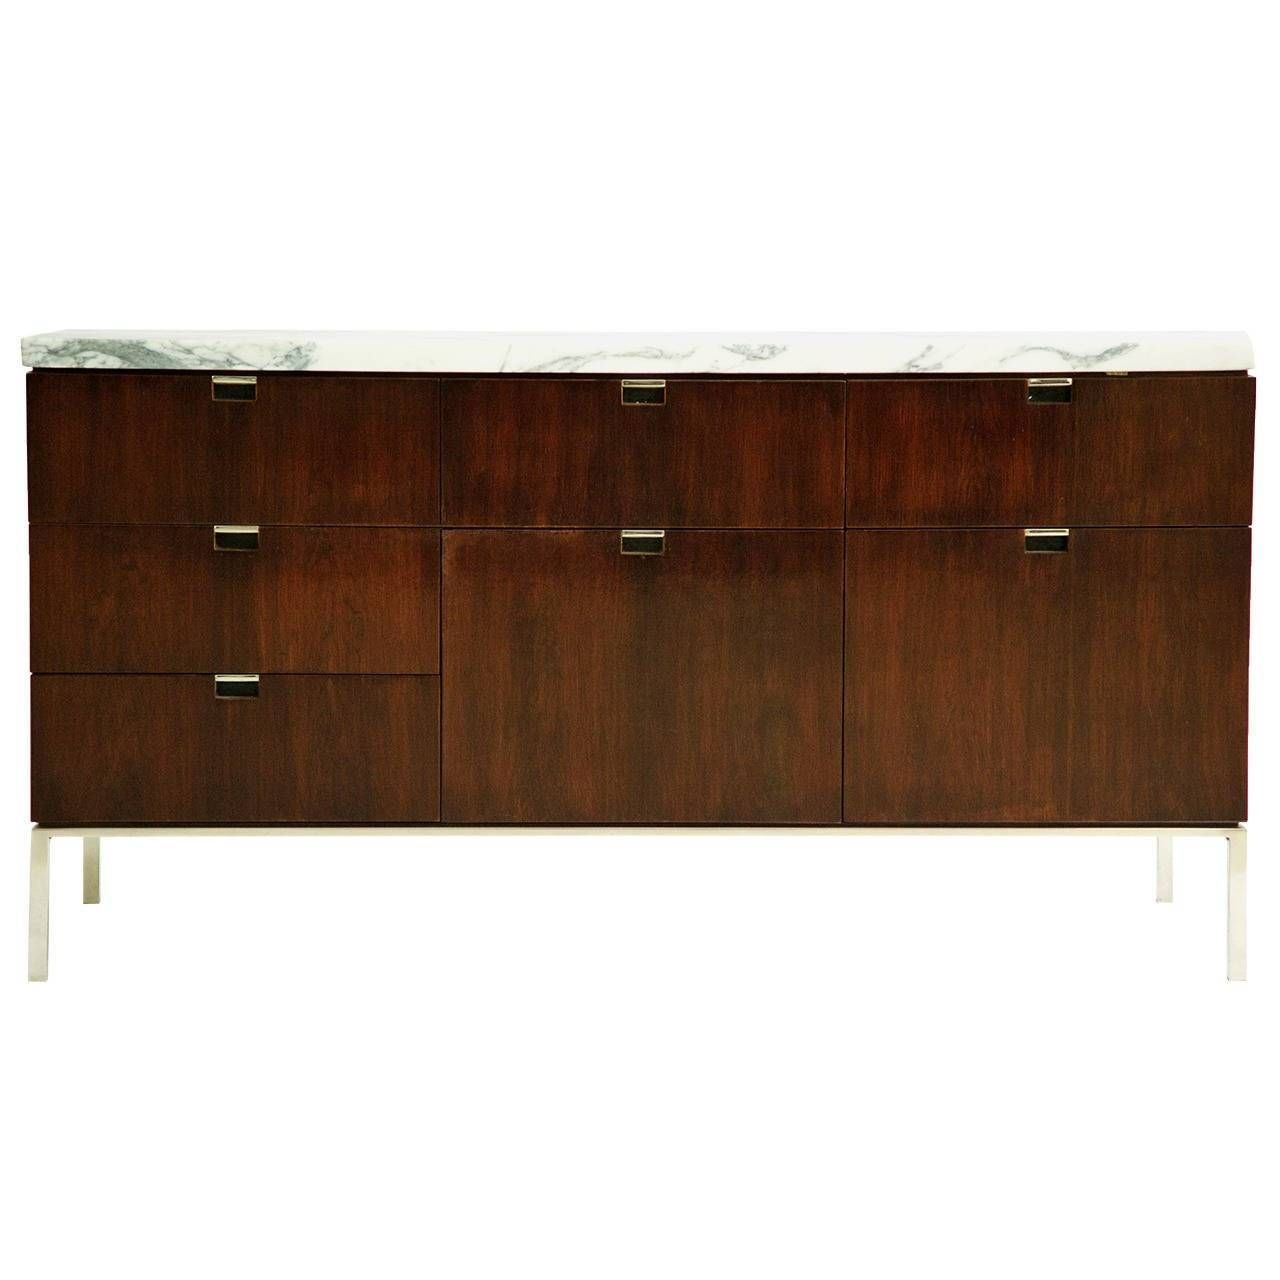 Florence Knoll Credenza Custom Marble Top For Sale At 1stdibs For Latest Florence Knoll Sideboards (View 11 of 15)